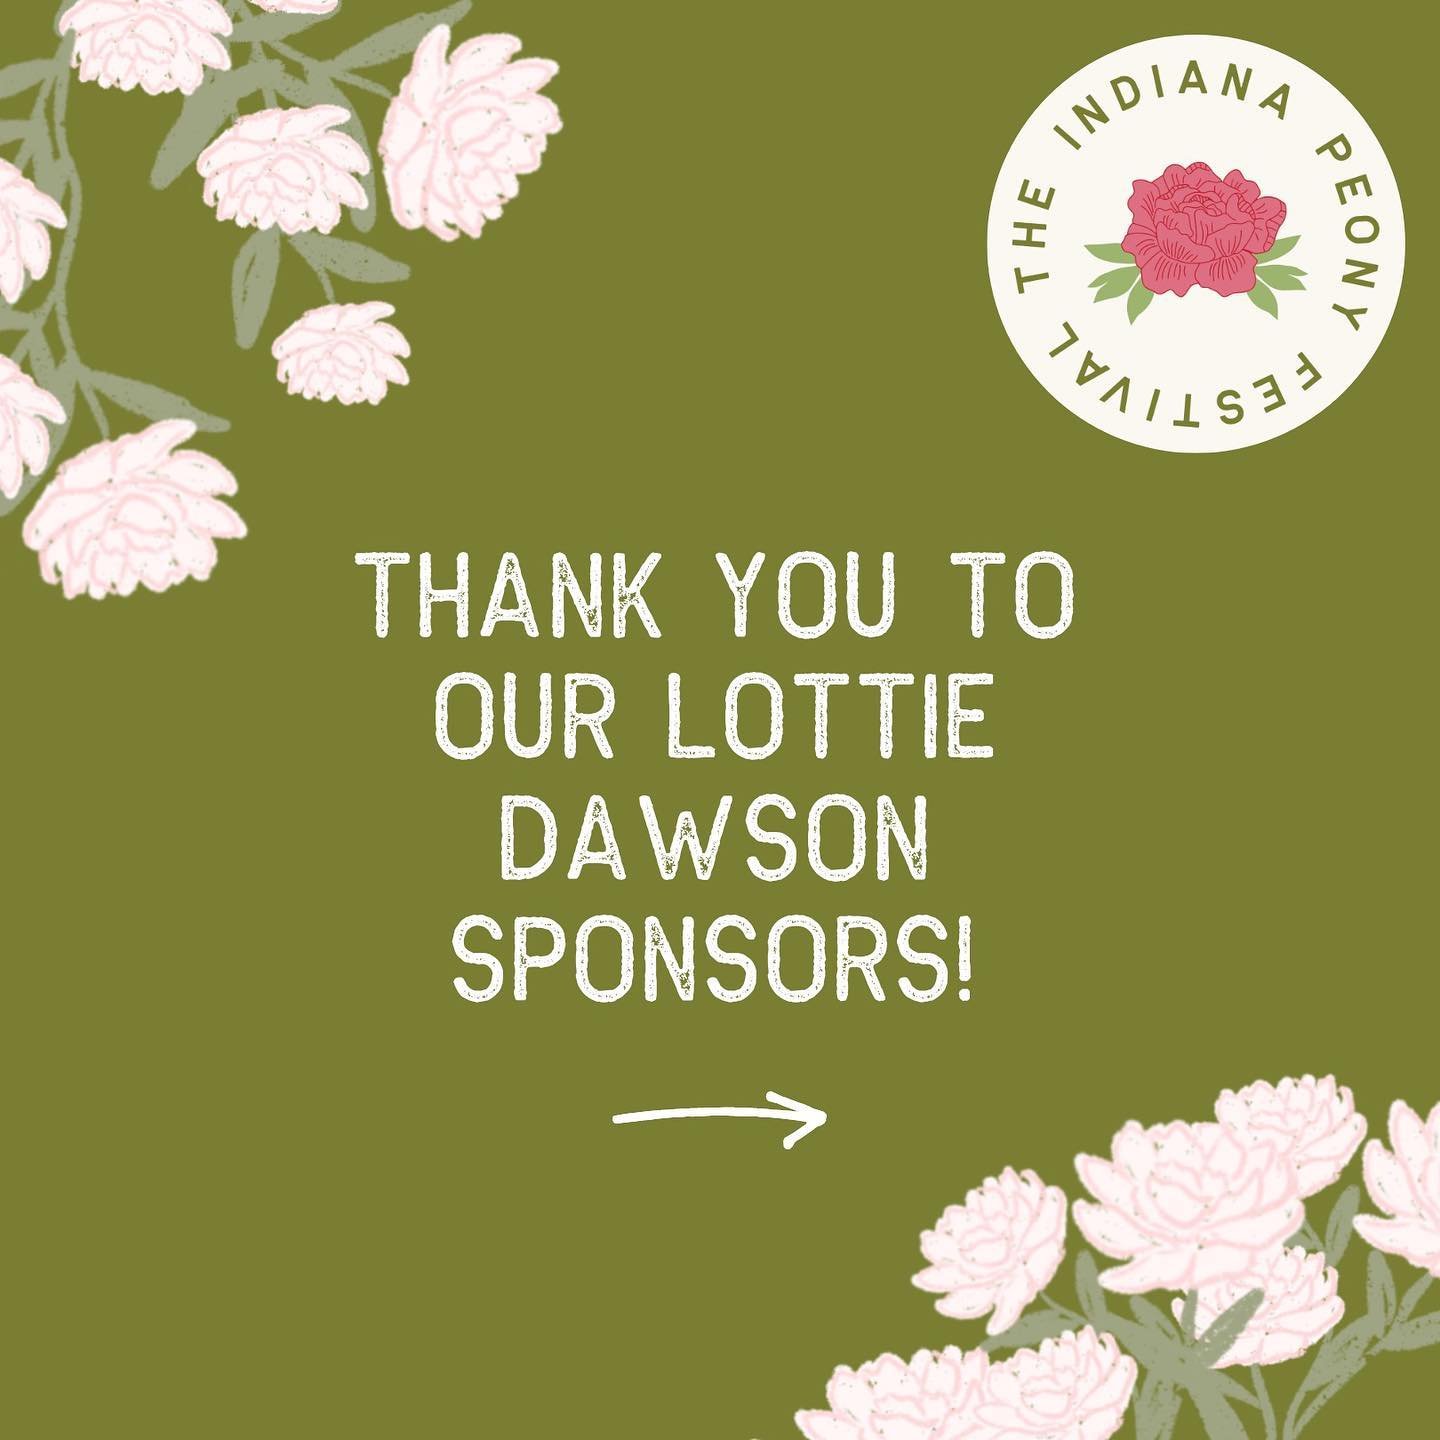 We&rsquo;d like to take a moment to show some love to our Lottie Dawson level sponsors! They help us so much with a huge financial lift in making this festival so special. We couldn&rsquo;t do it without you! Give these businesses a big round of appl